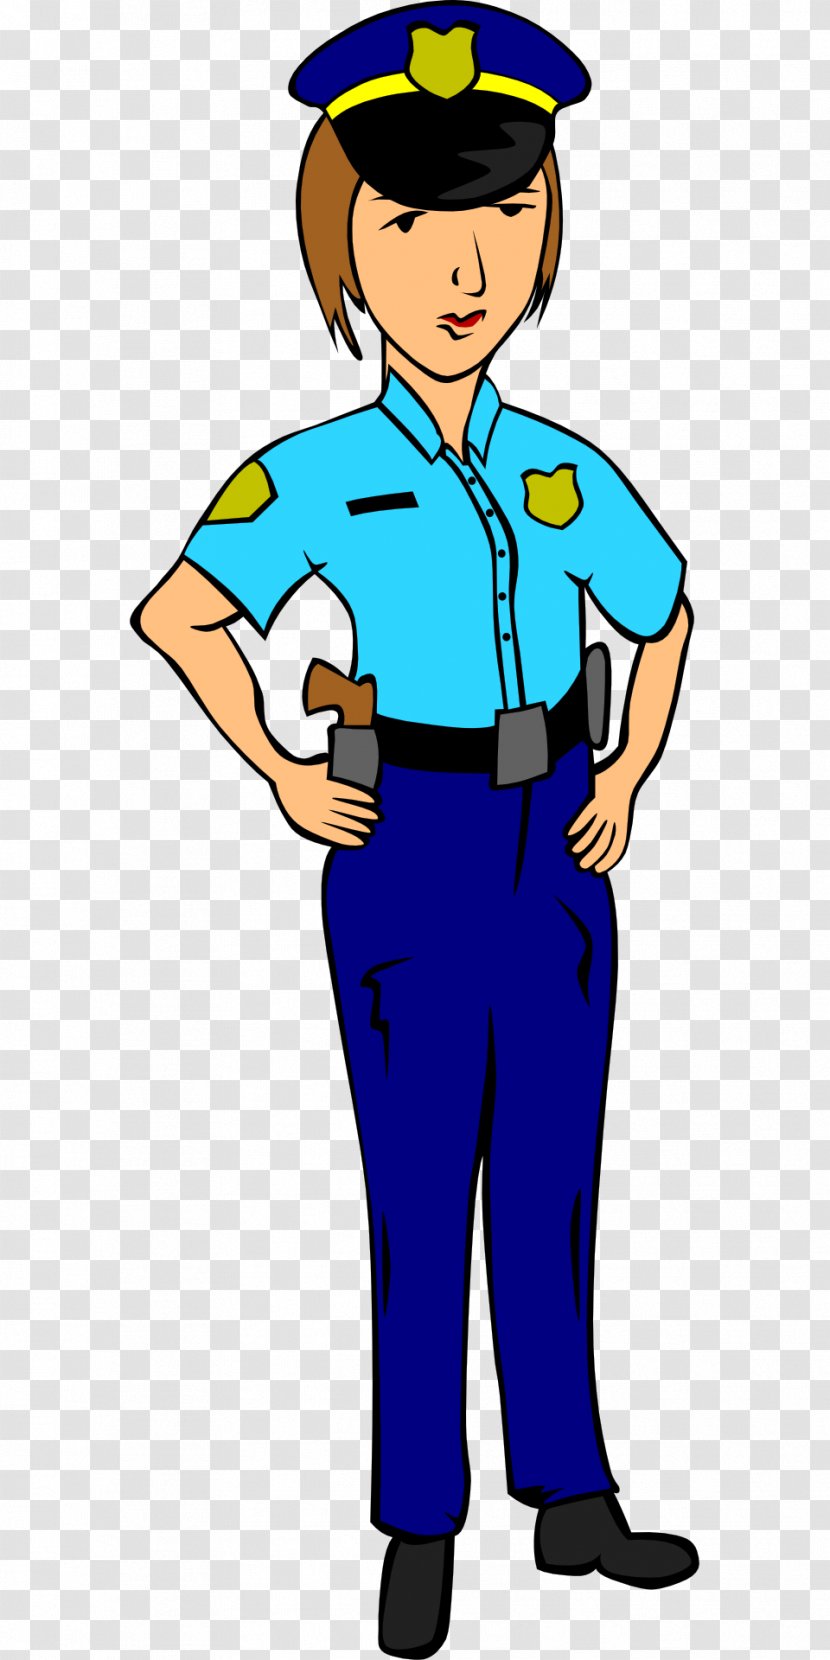 Police Officer Woman Clip Art - Profession - Officers Transparent PNG